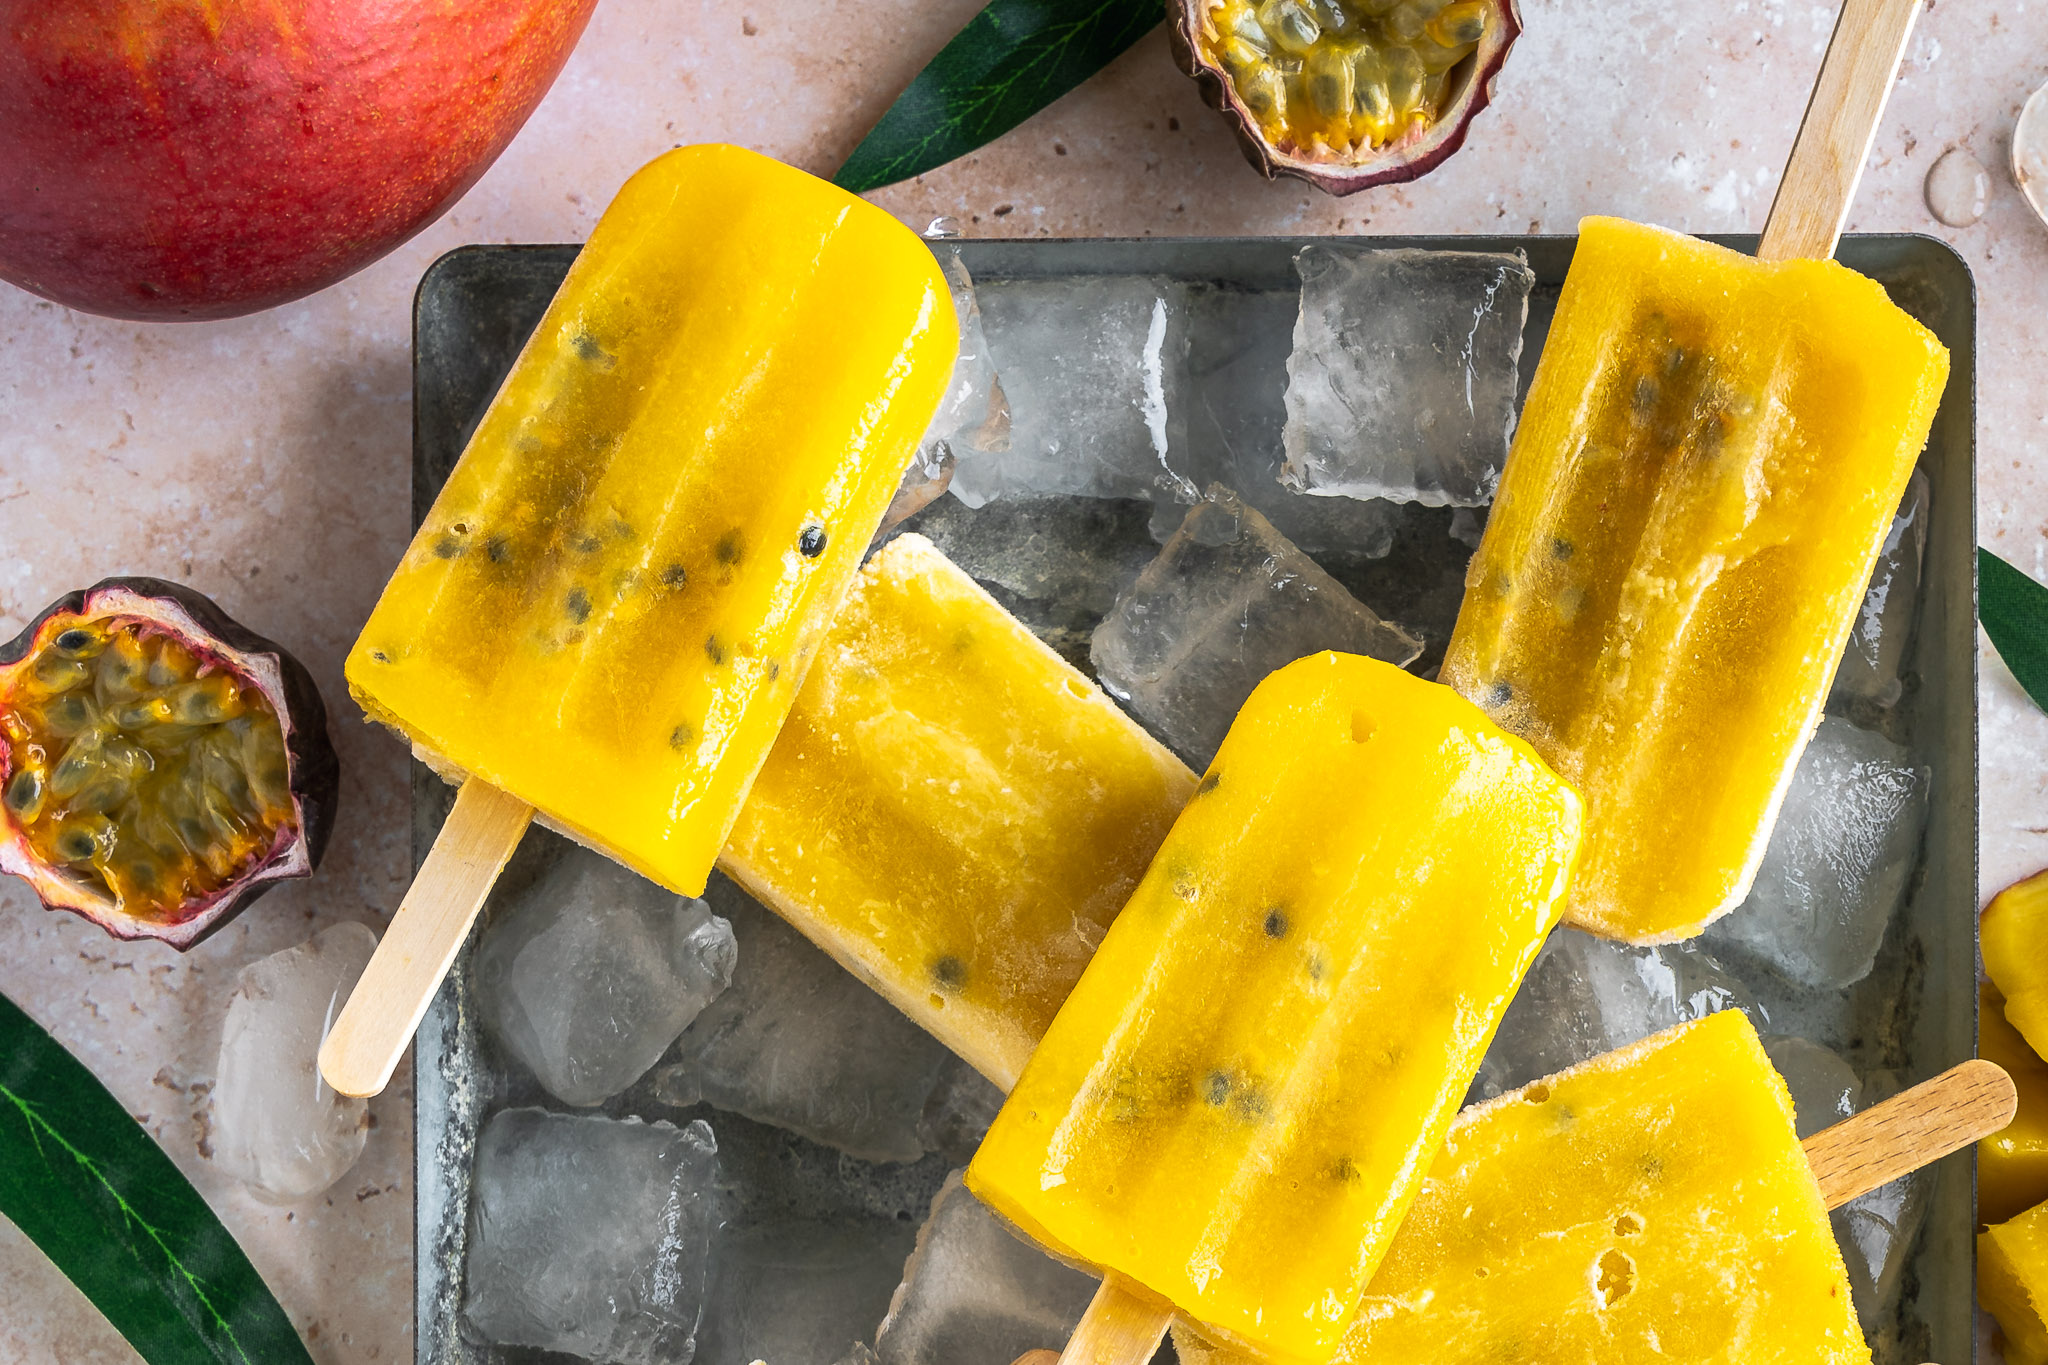 Home-made mango ginger passionfruit popsicles